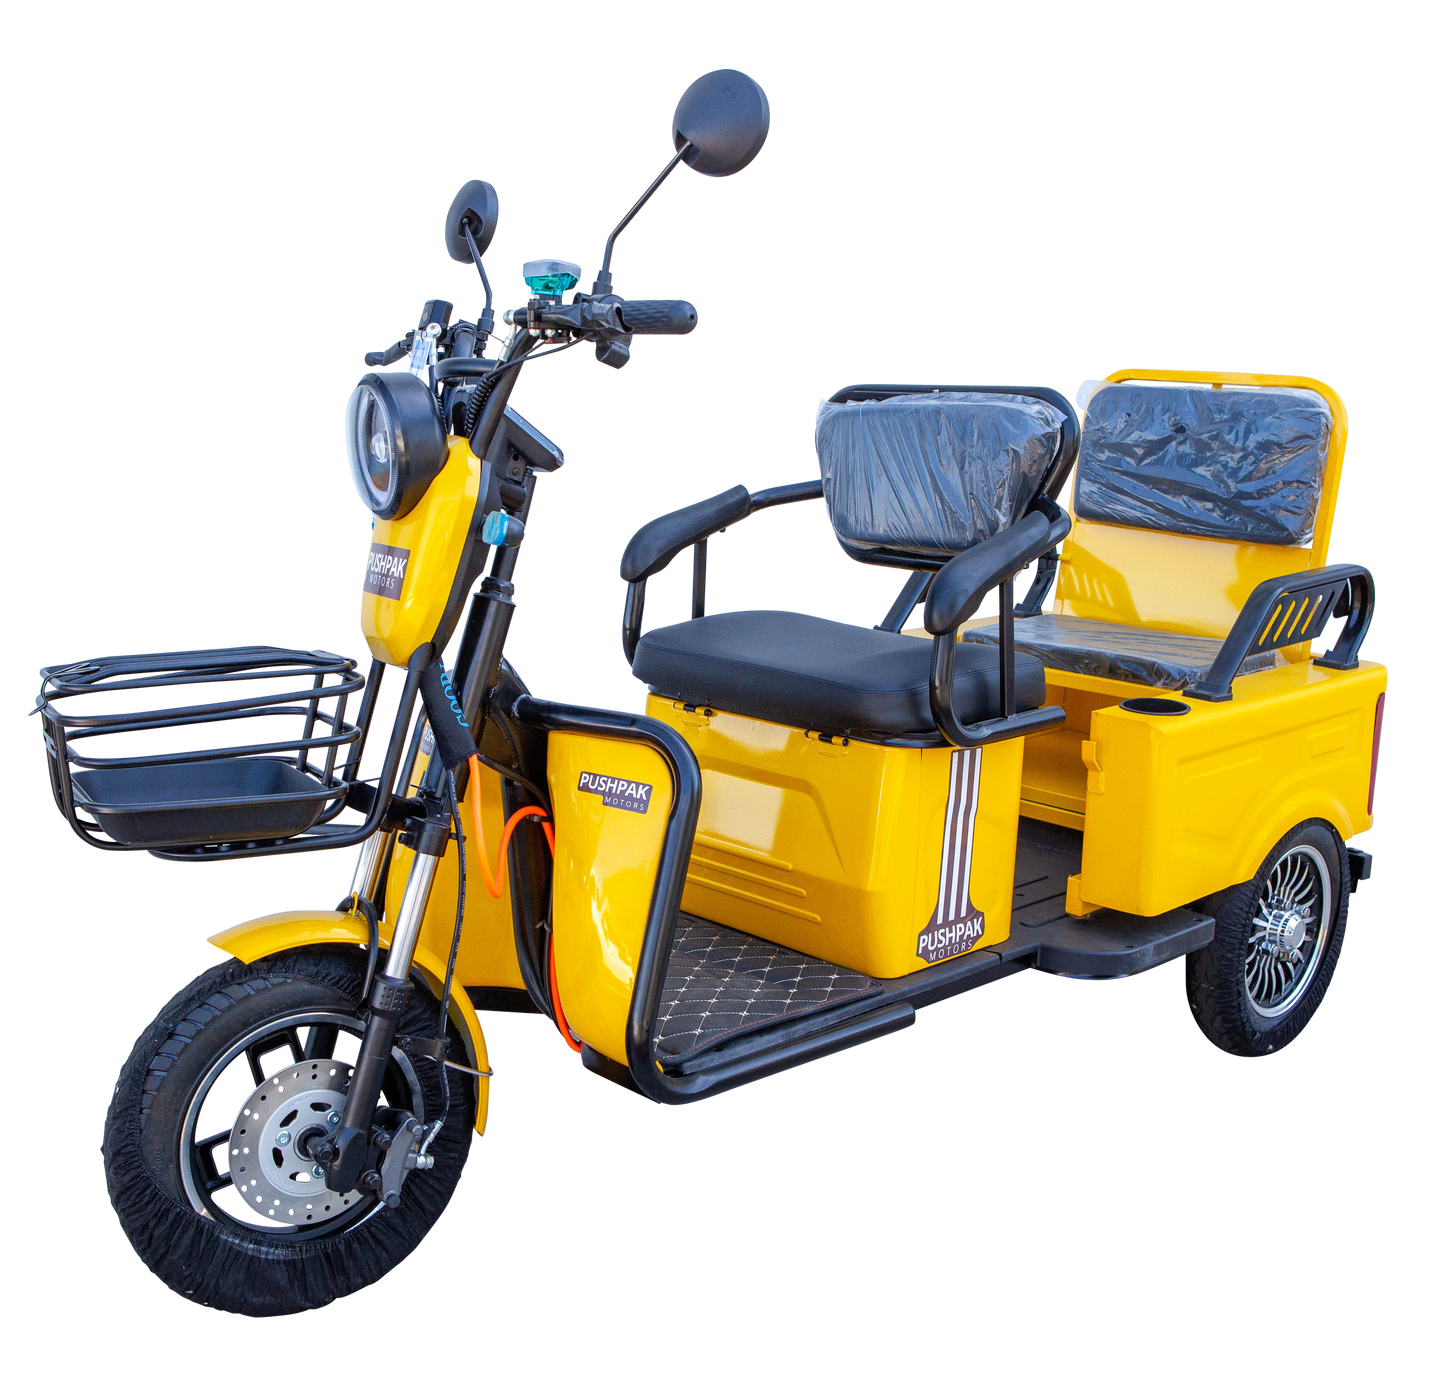 Pushpak 3000 2-Person 3-Wheel Mobility Scooter